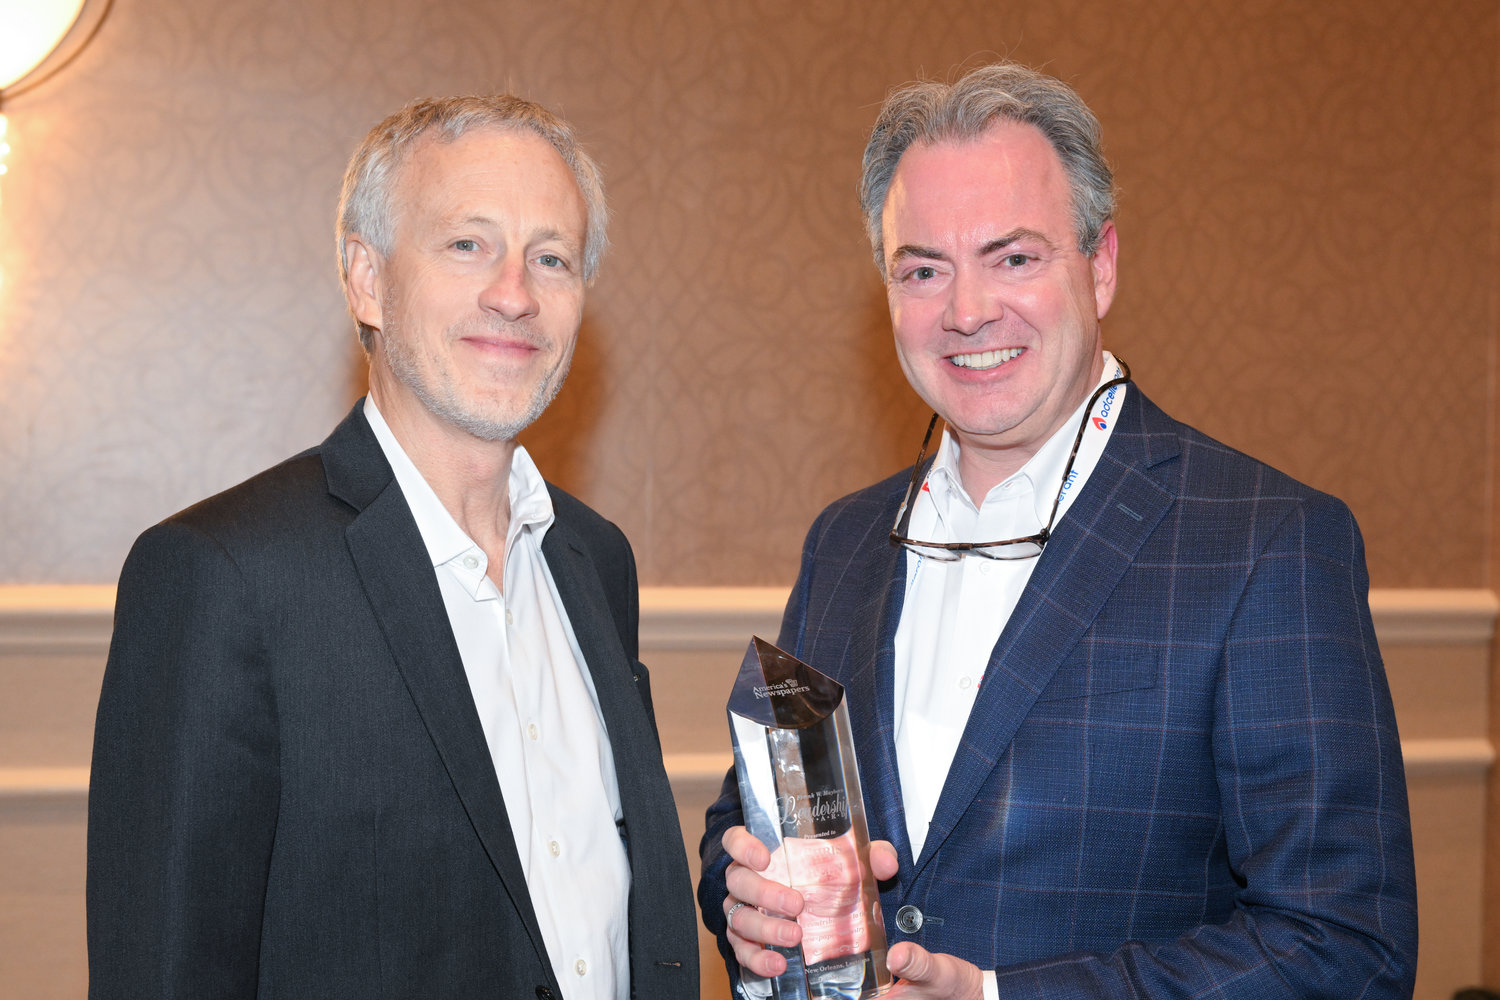 Dean Ridings, CEO of America's Newspapers, and Chris Reen, the 2022 recipient of the Frank W. Mayborn Leadership Award. (Photo by Jeff Strout)